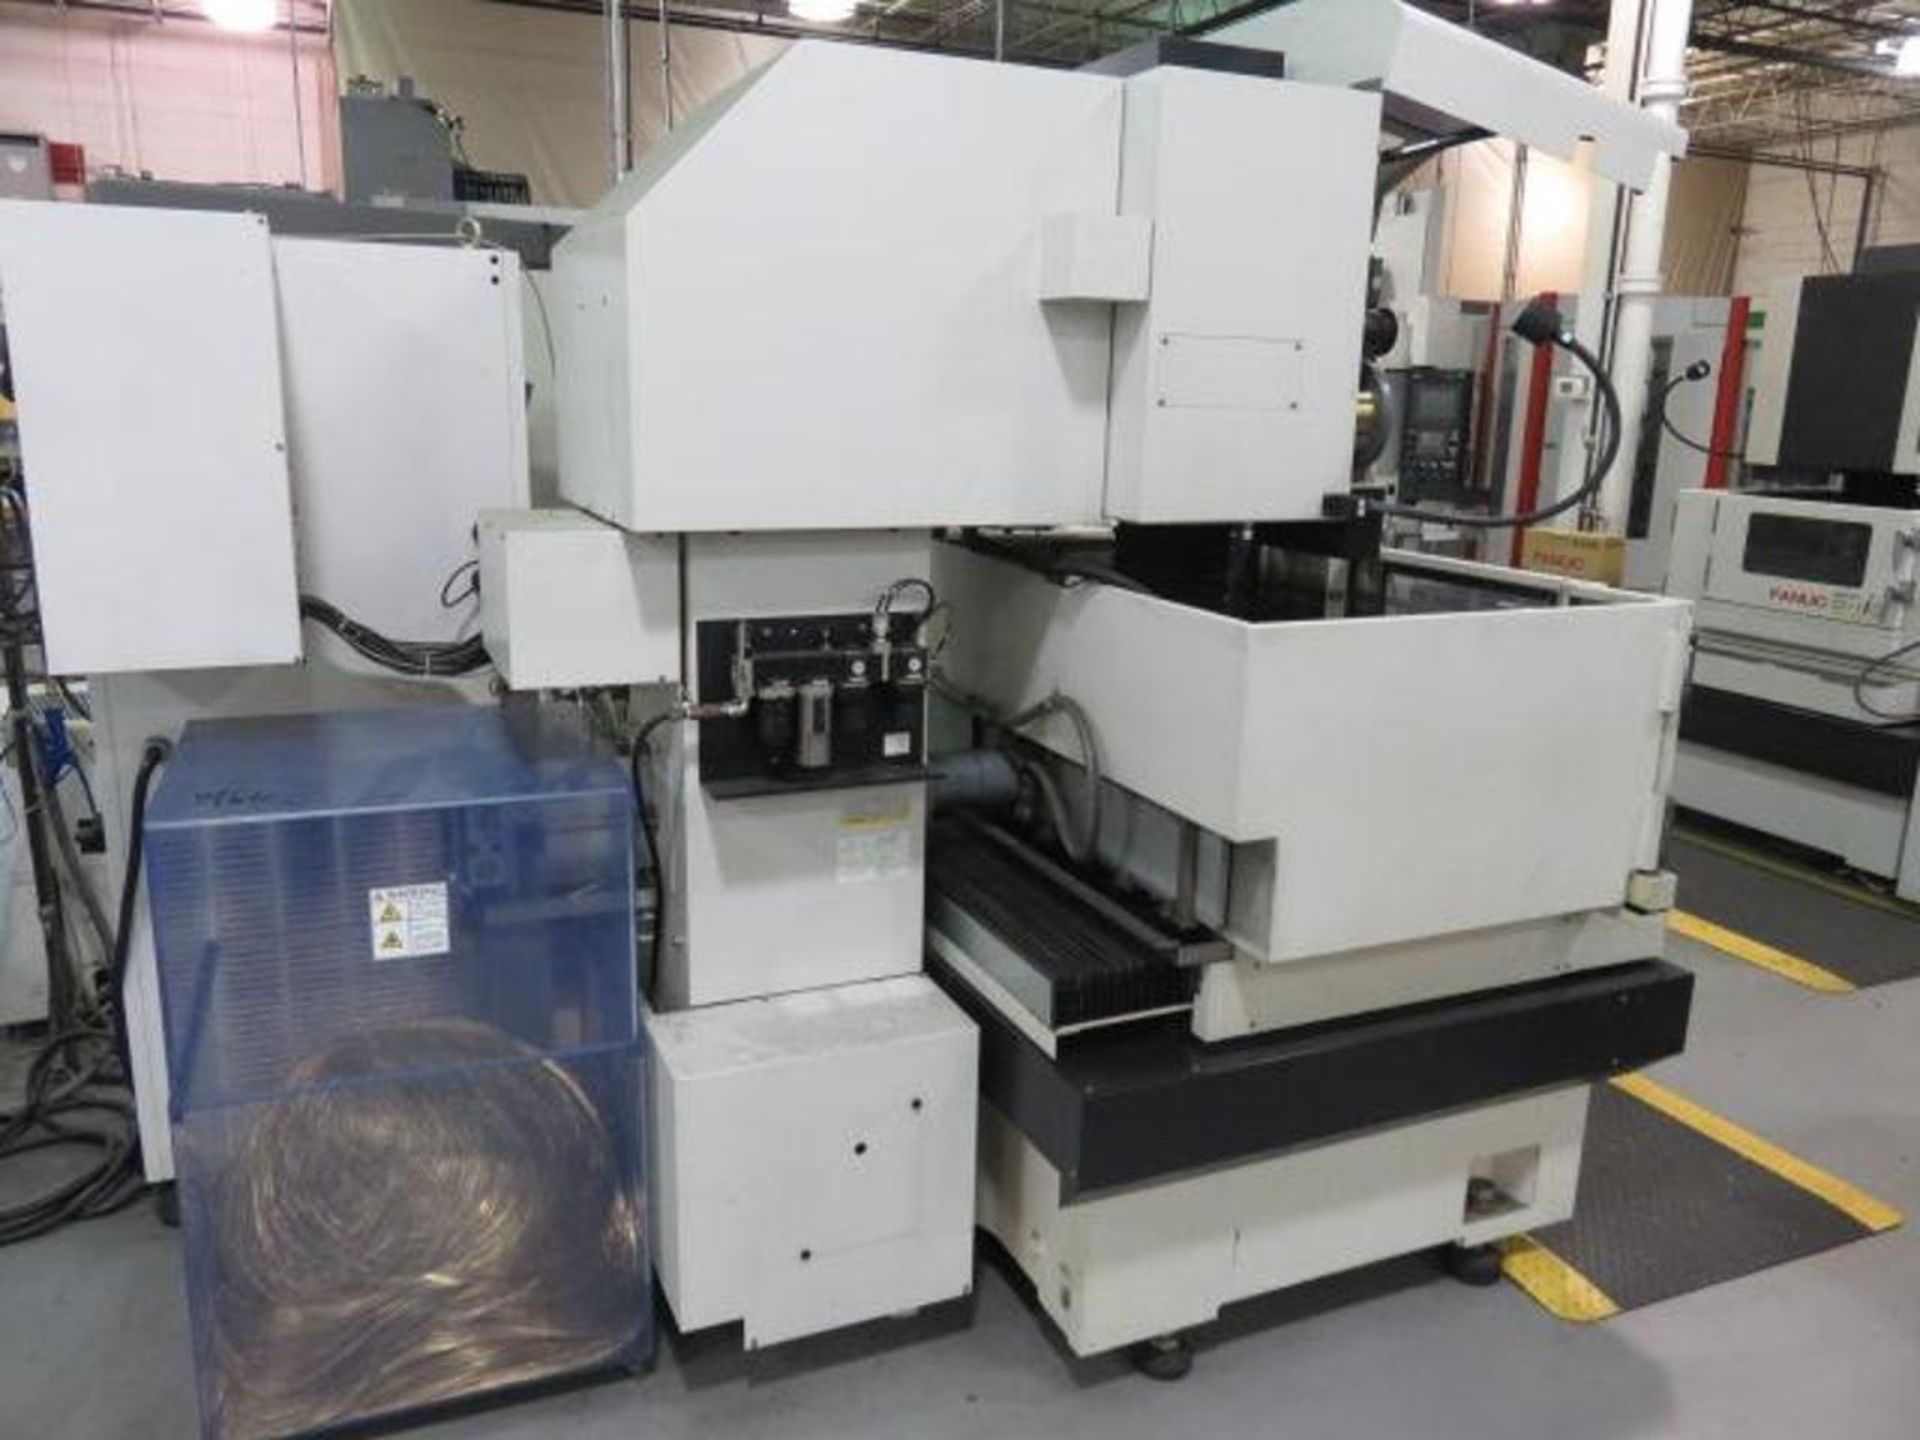 Fanuc 4-Axis CNC Wire EDM Machine Model Robocut AX-1iC, S/N P051C1571 (2005), 43 in. x 33 in. x 21 i - Image 3 of 6